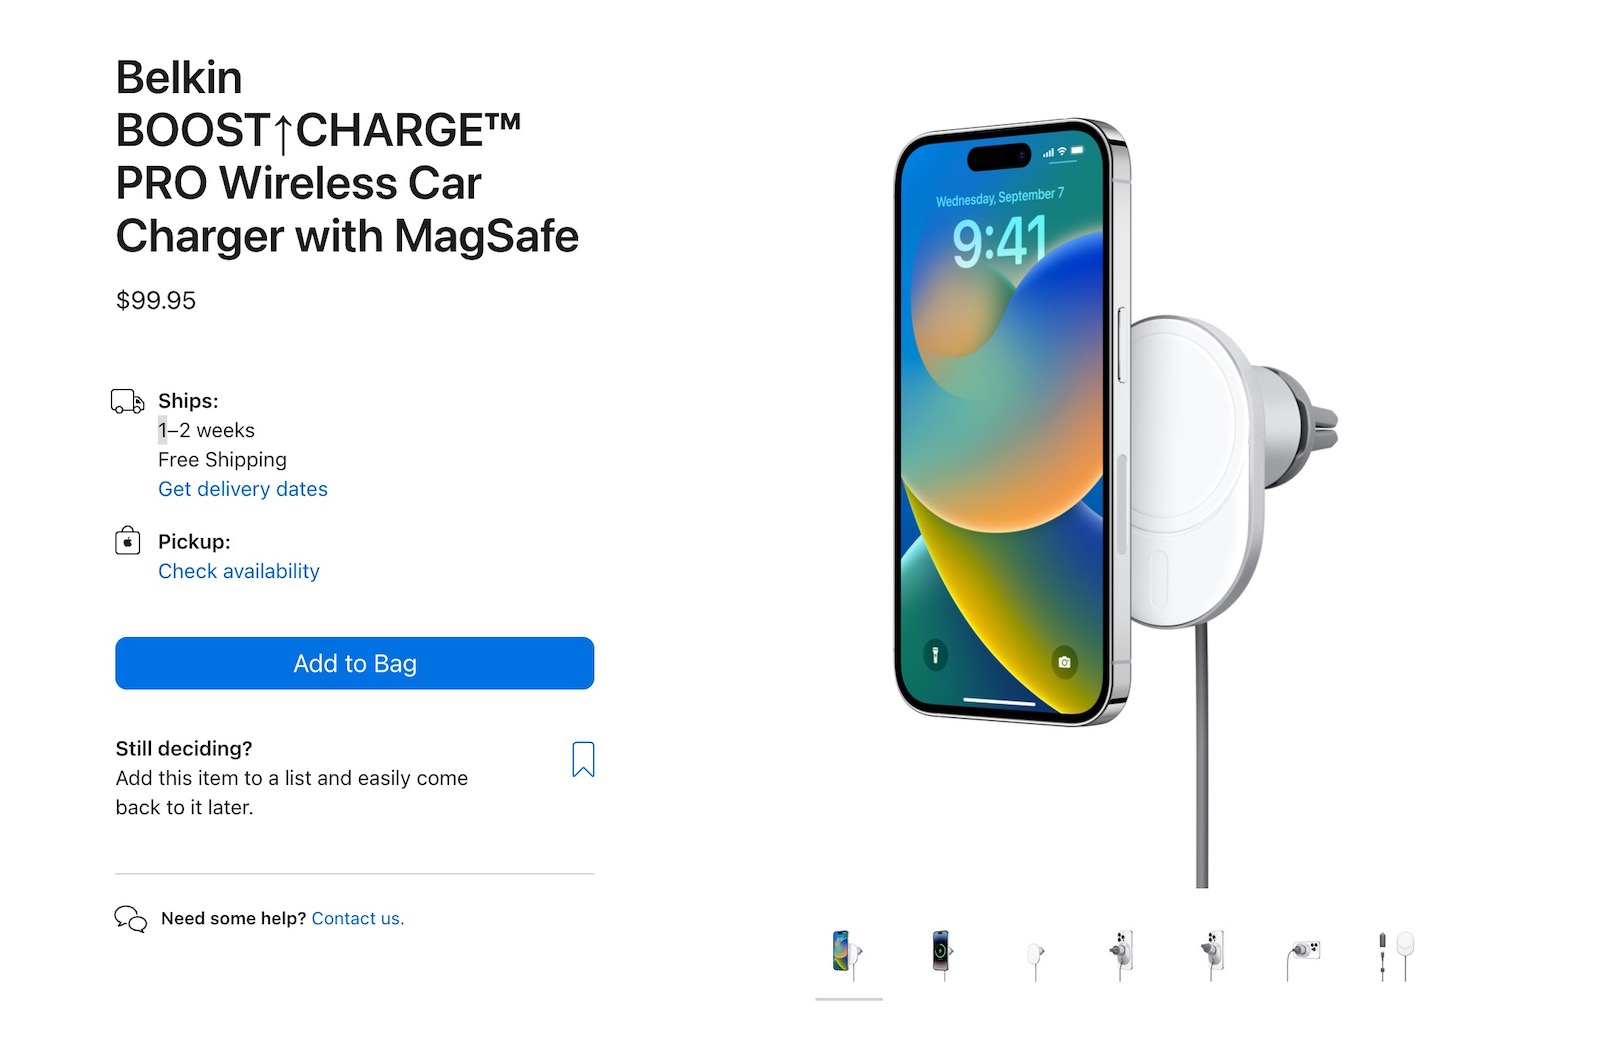 Belkin boostcharge pro wireless car charger with magsafe